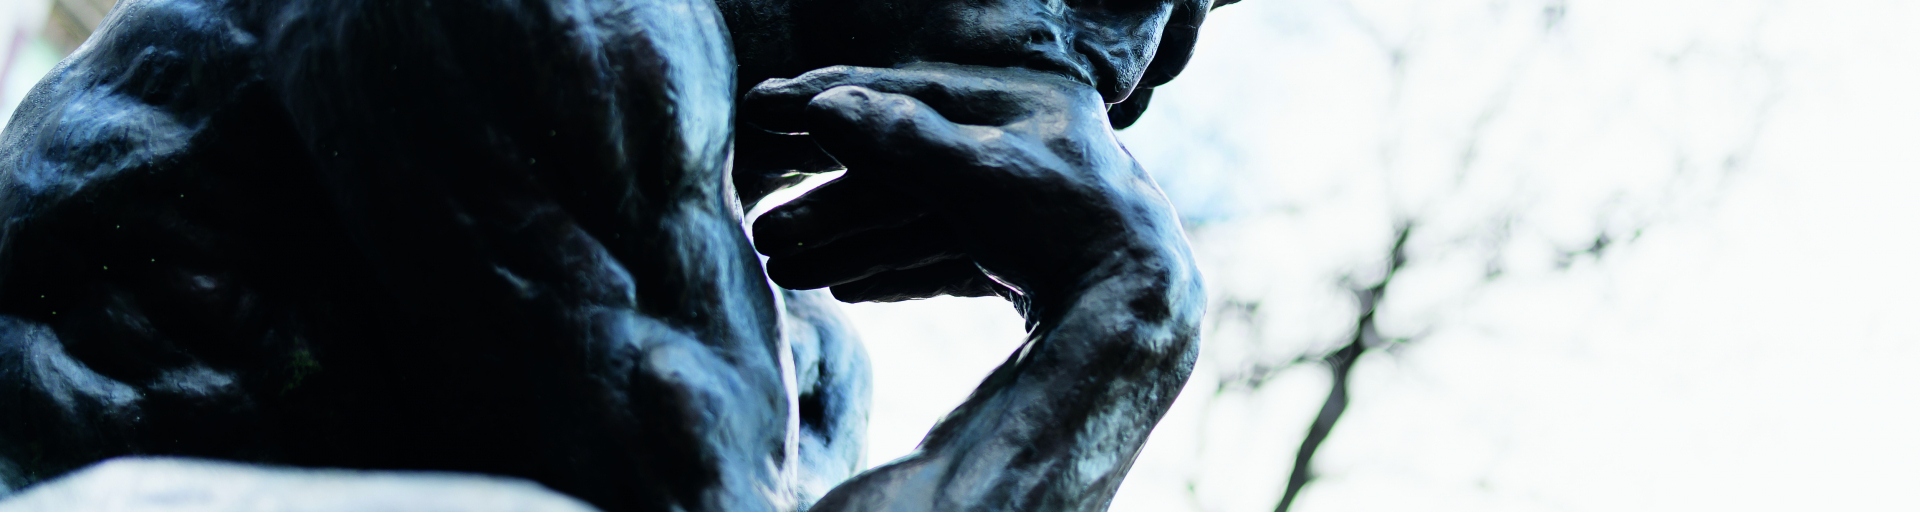 A statue of a man is crouched over, eyes gazing downward, with his hand brought to his chin. He is the thinker.